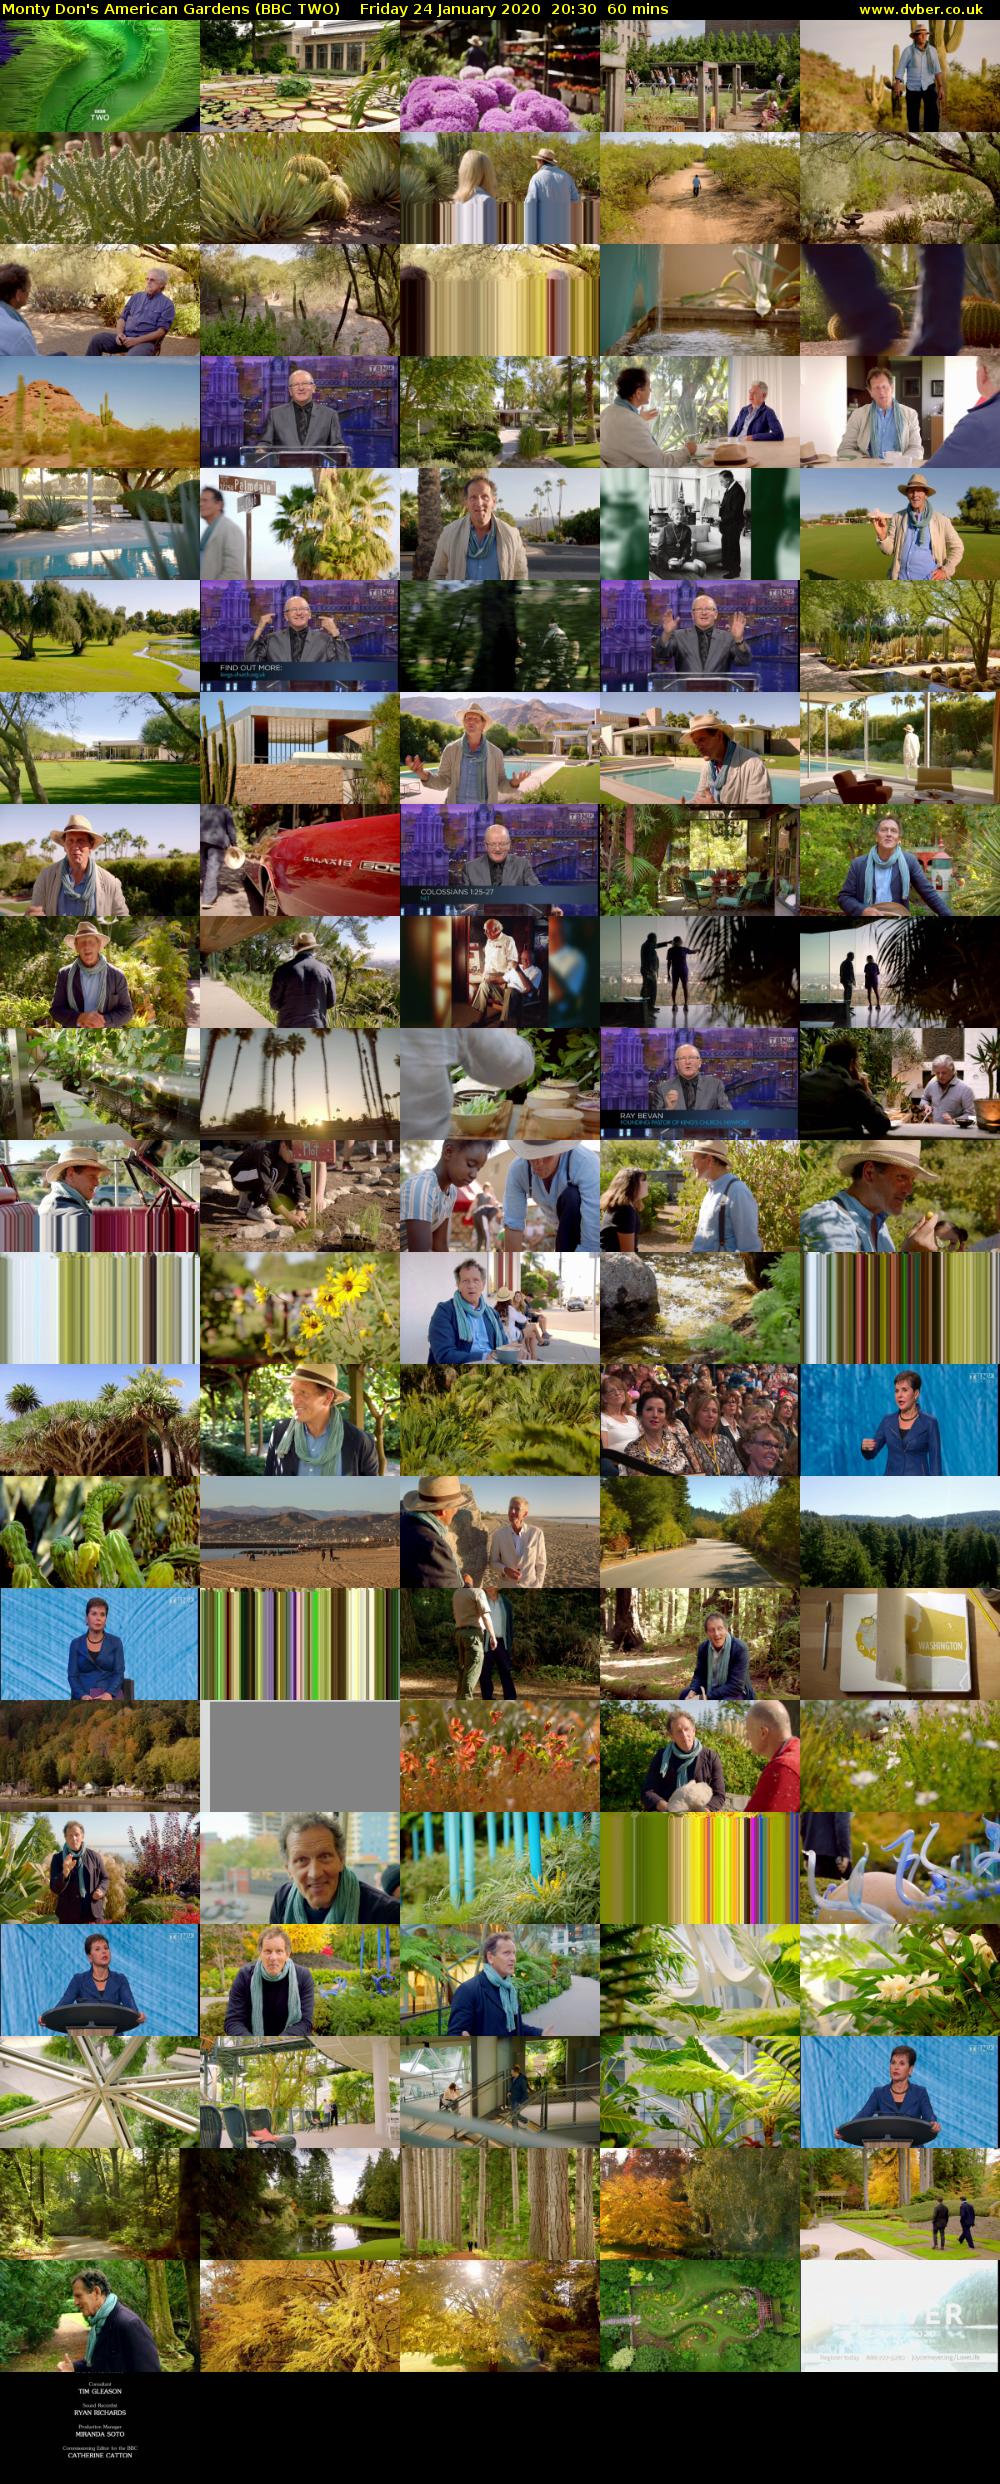 Monty Don's American Gardens (BBC TWO) Friday 24 January 2020 20:30 - 21:30